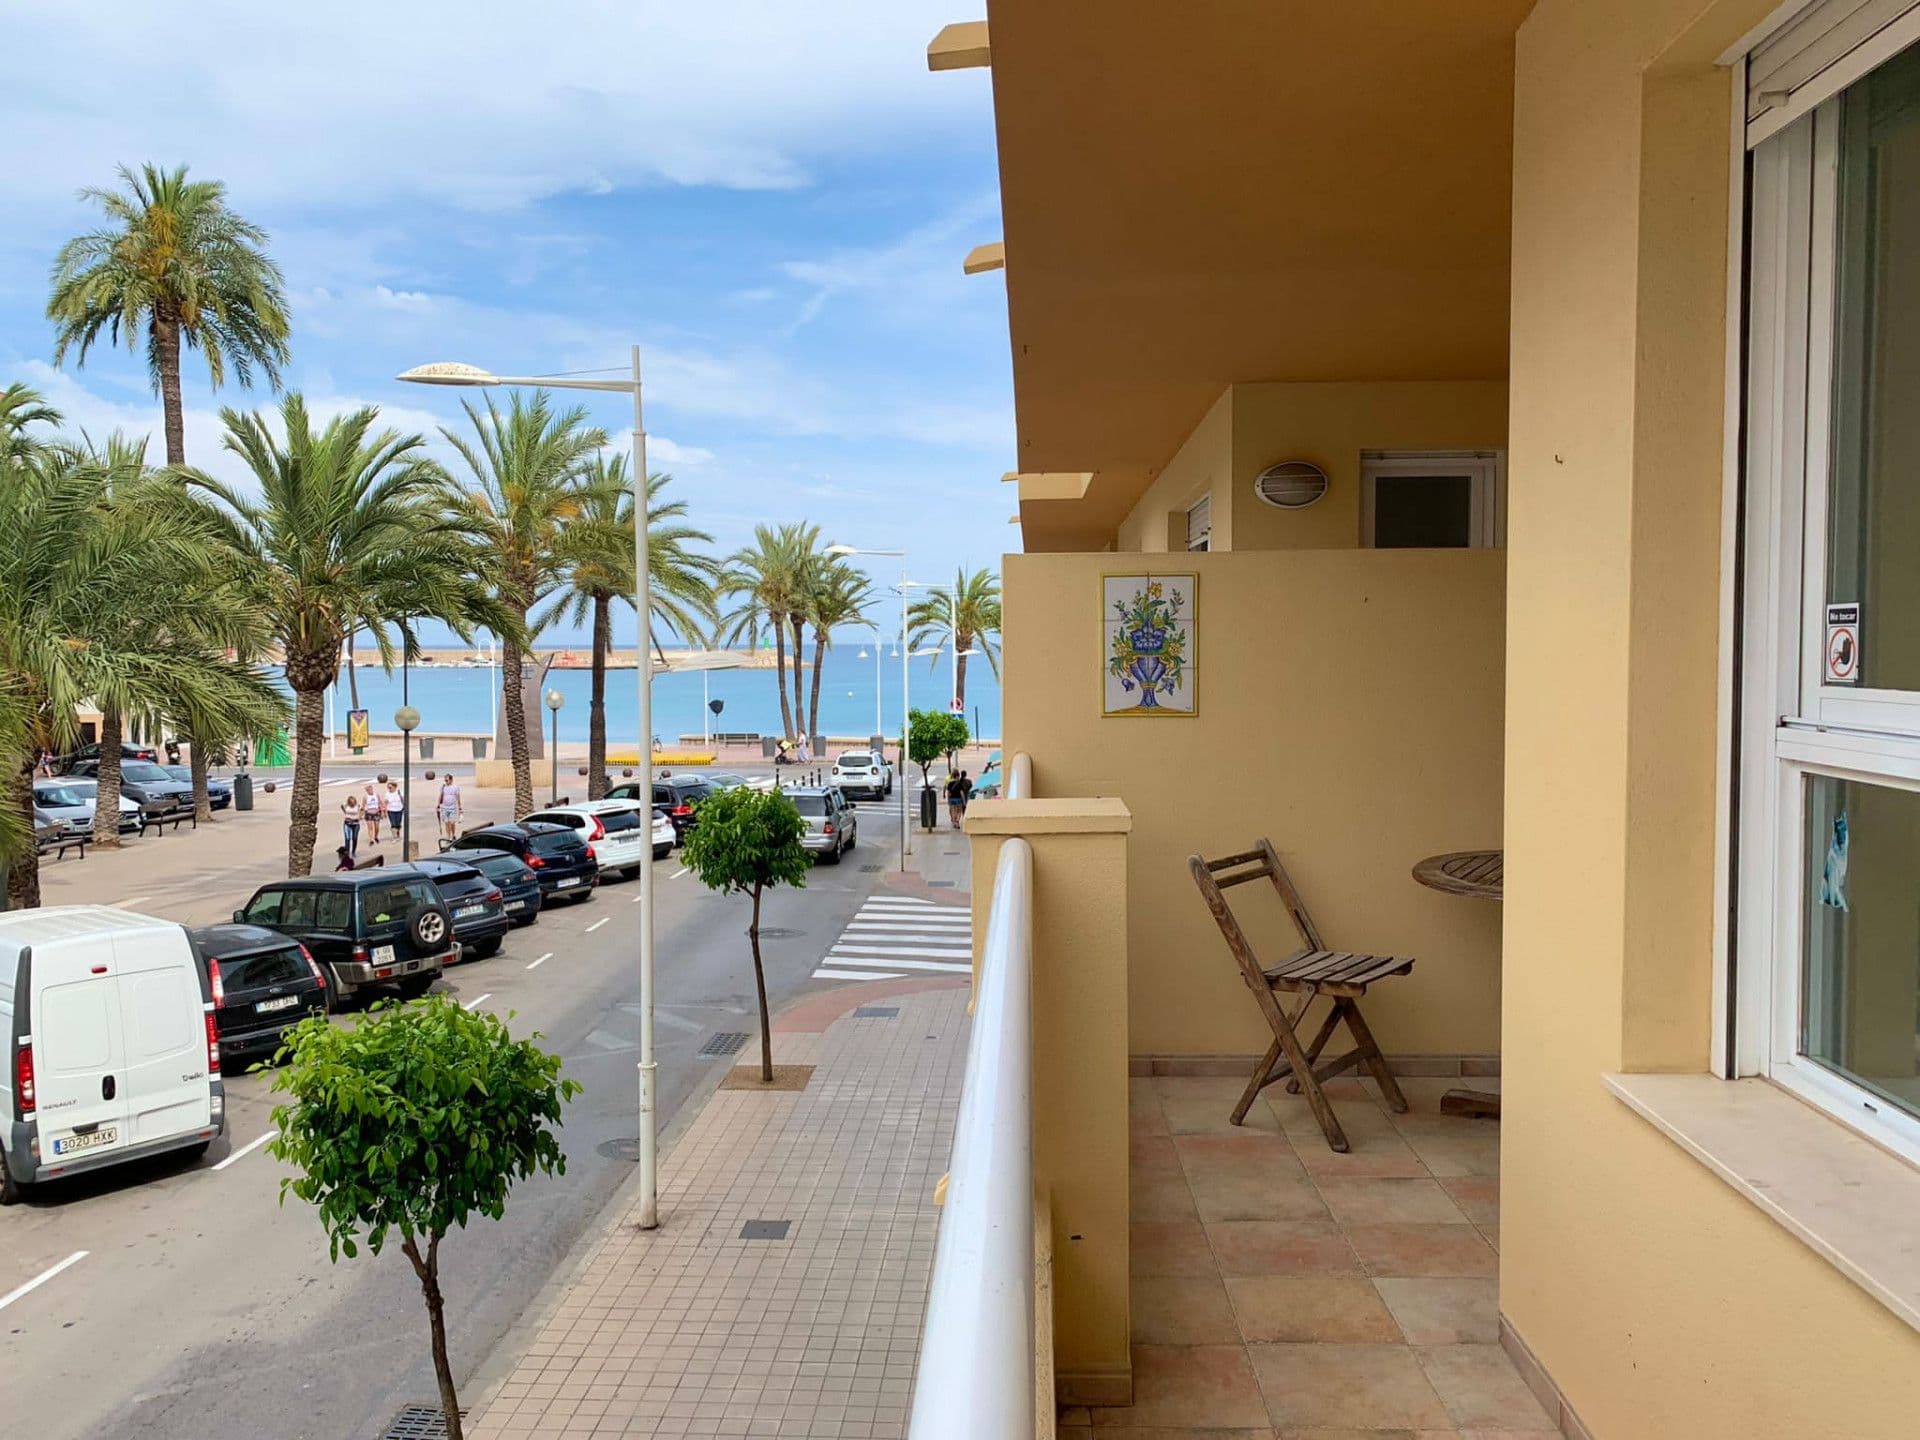 Bright flat located in the heart of the port, next to the beach.